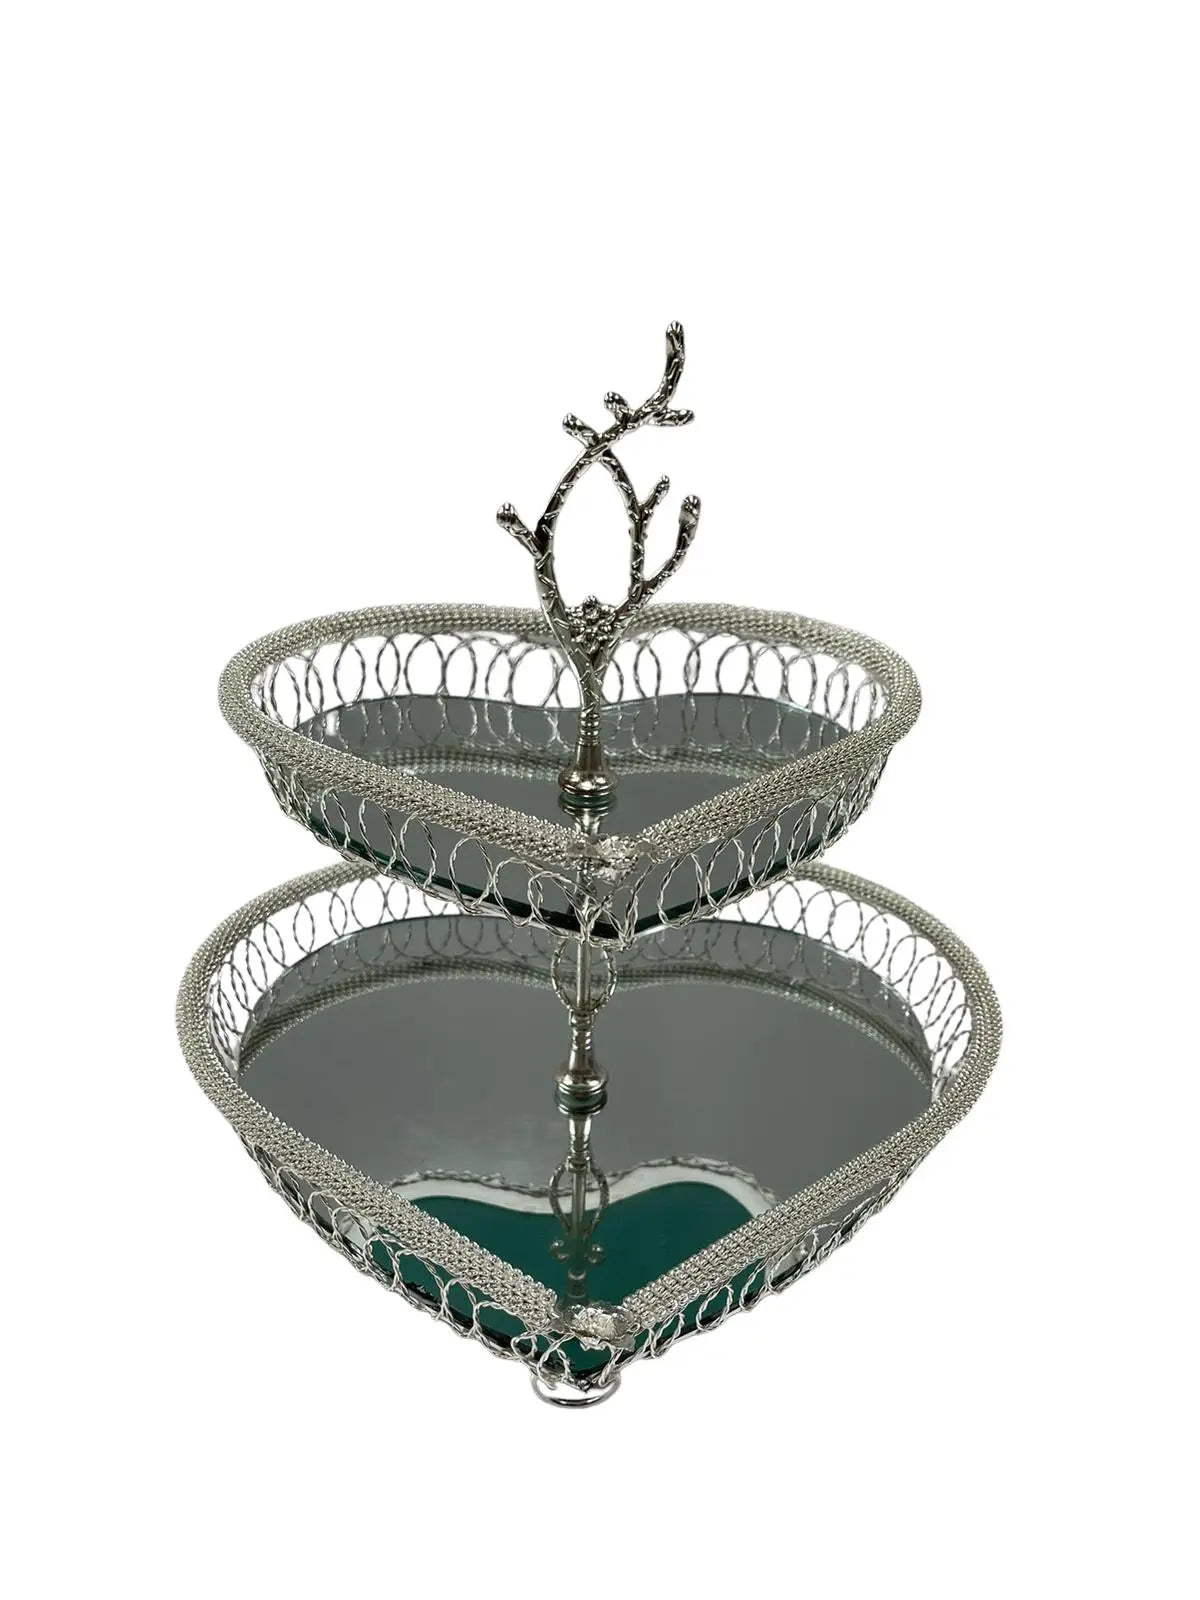 2 Tier Basket Style Heart Mirrored Serving Tray -  Maher -  Armani Gallery